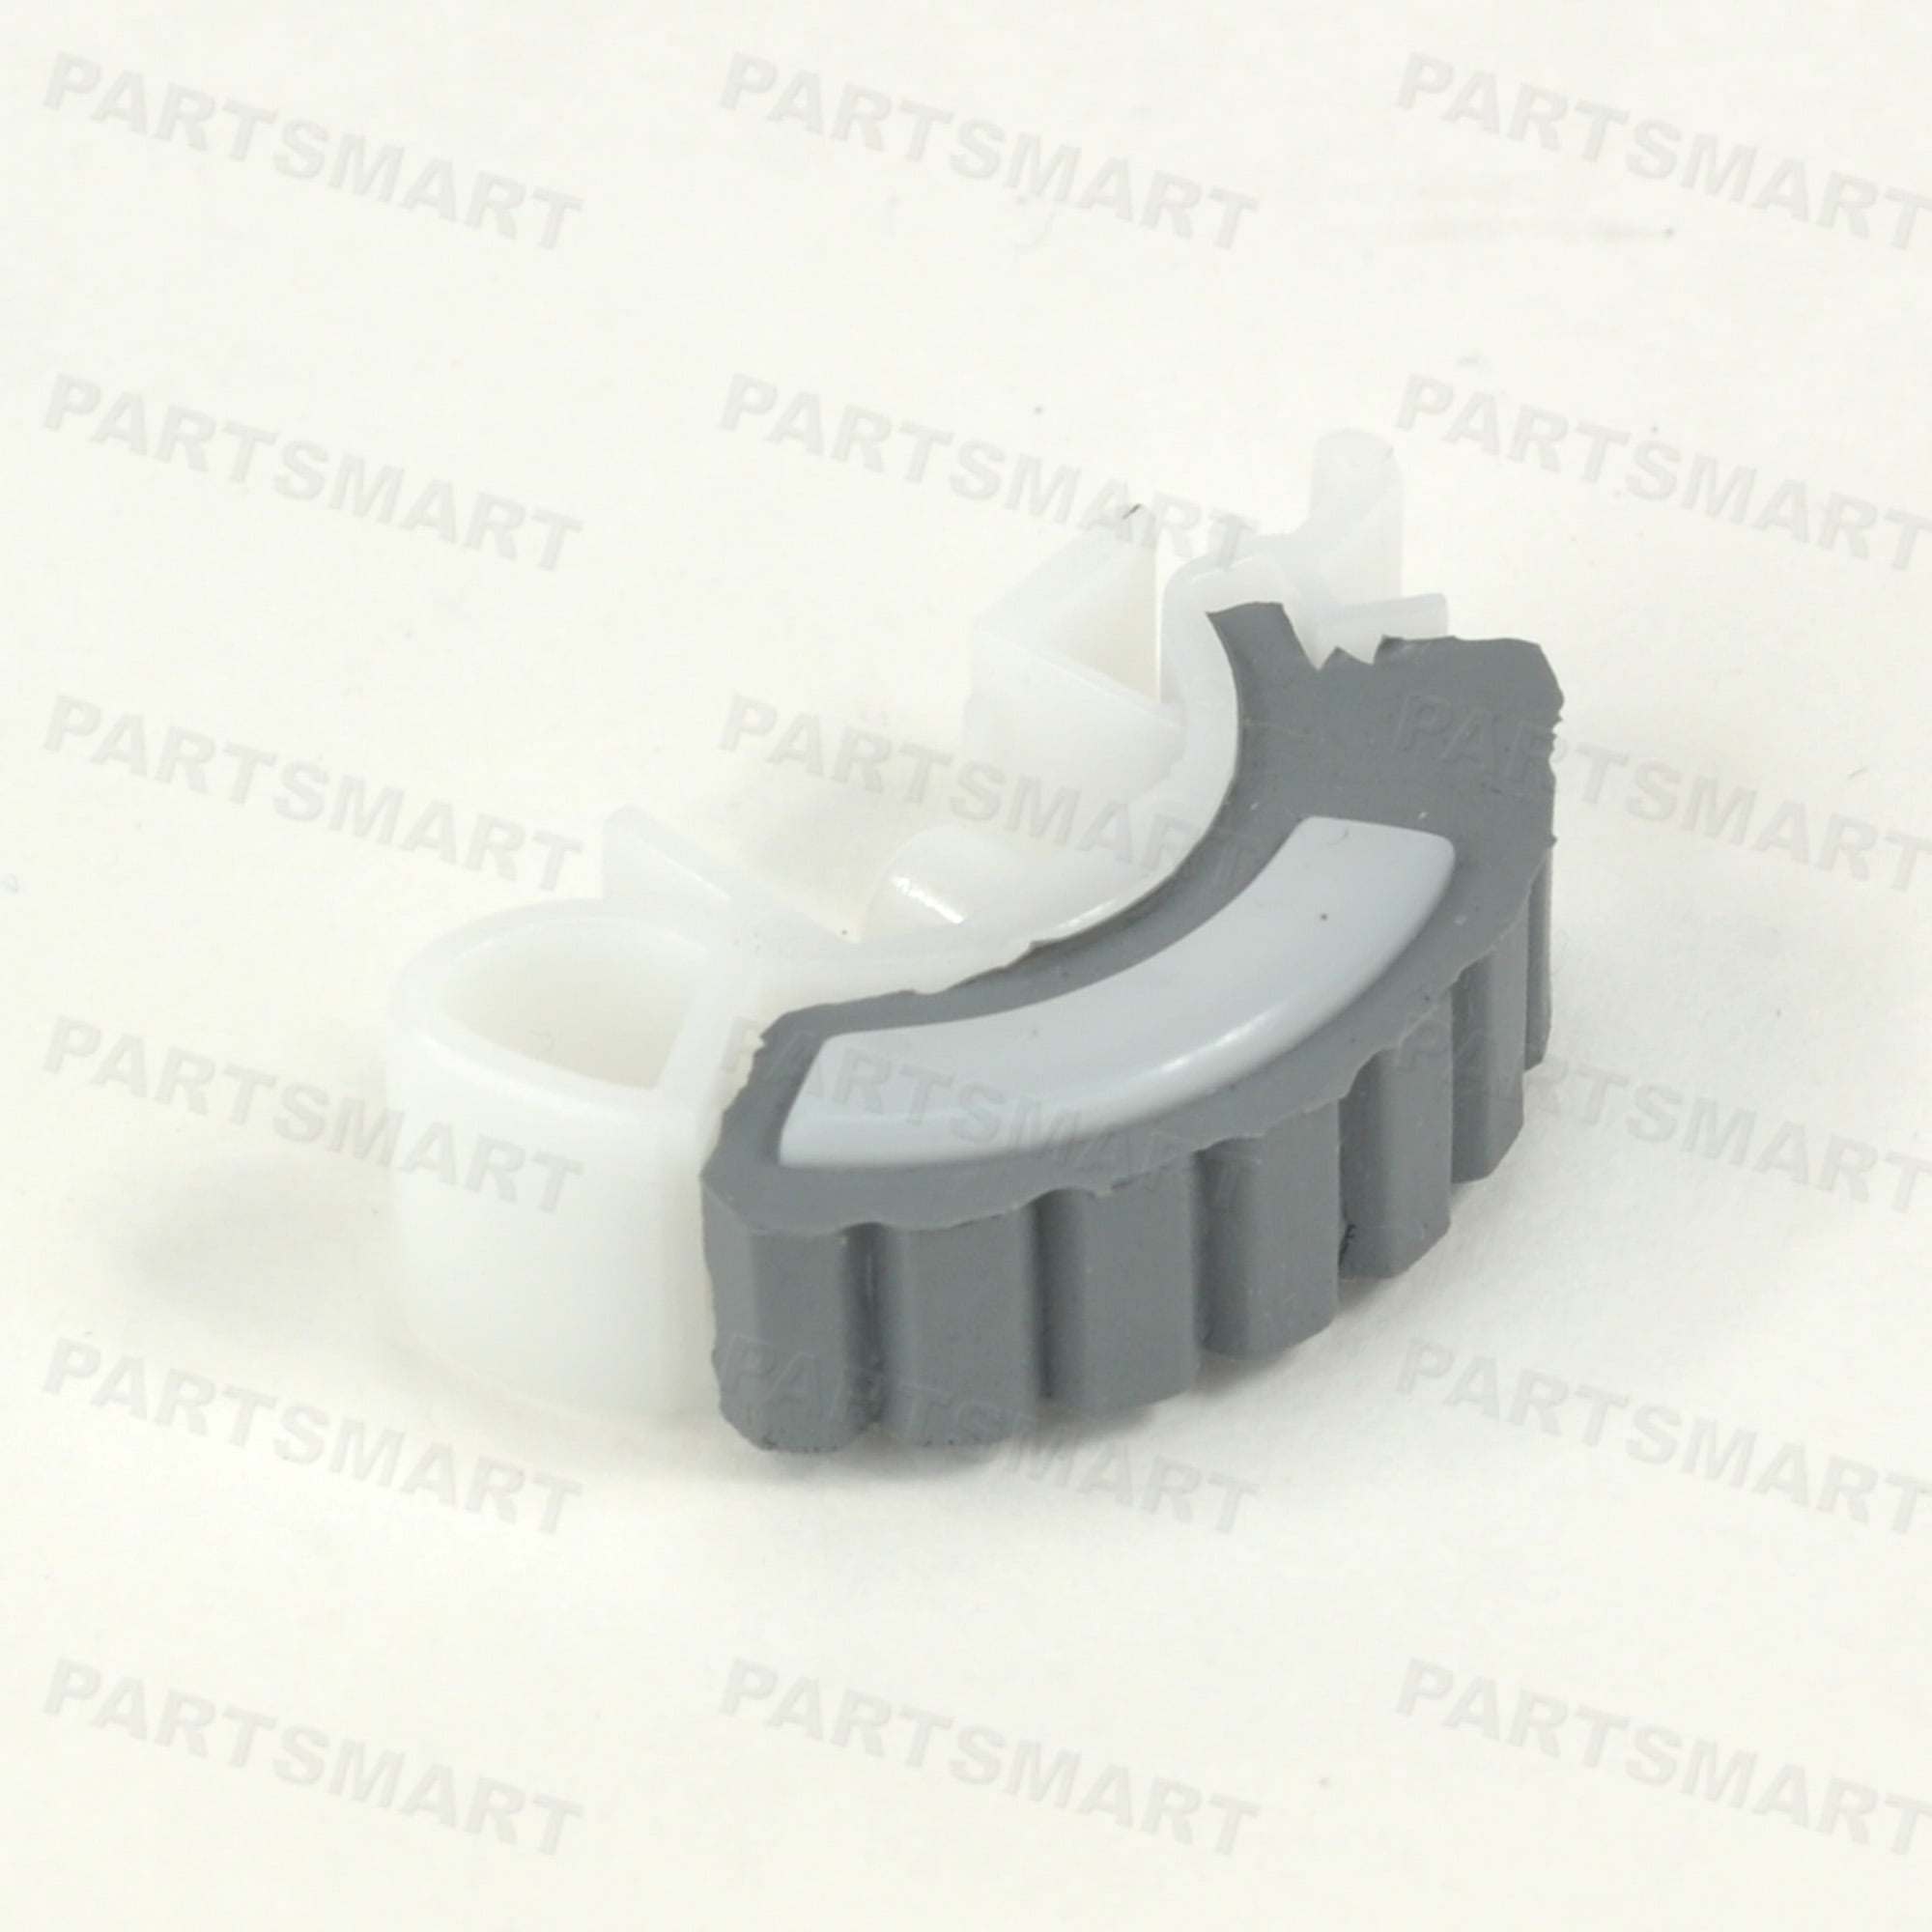 4 Pcs Primary Pick Up Roller RB1-8865 for  HP 4000 4050 4100 4500 5000 5100